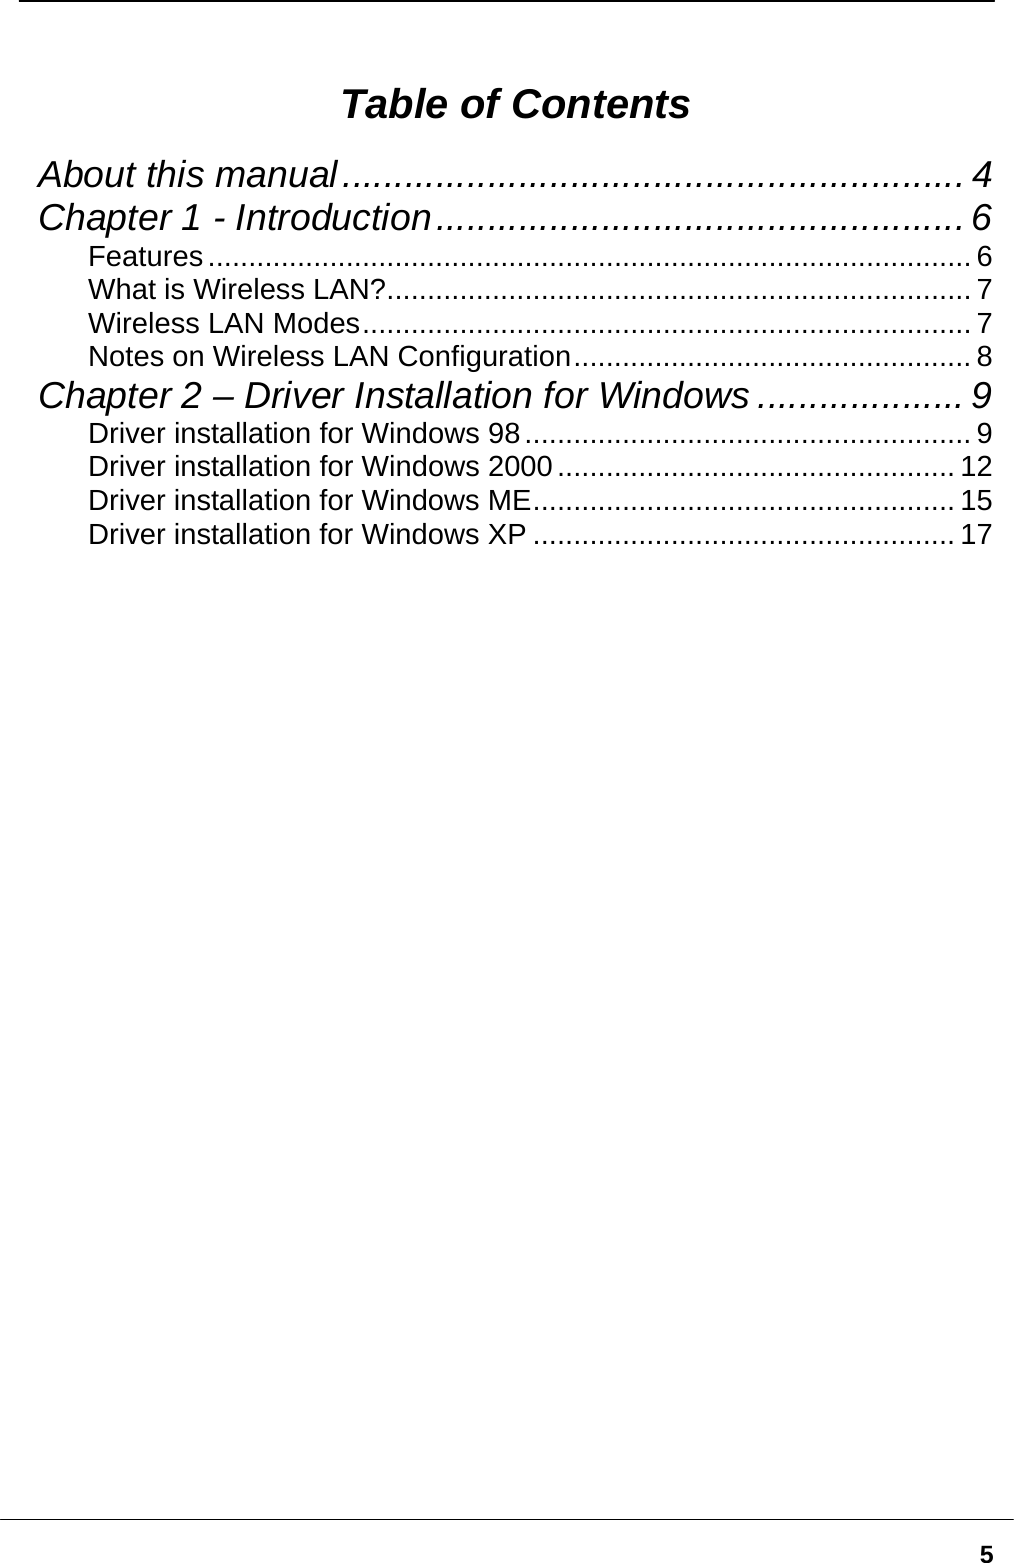   5 Table of Contents About this manual............................................................ 4 Chapter 1 - Introduction................................................... 6 Features.............................................................................................. 6 What is Wireless LAN?........................................................................ 7 Wireless LAN Modes........................................................................... 7 Notes on Wireless LAN Configuration................................................. 8 Chapter 2 – Driver Installation for Windows .................... 9 Driver installation for Windows 98....................................................... 9 Driver installation for Windows 2000................................................. 12 Driver installation for Windows ME.................................................... 15 Driver installation for Windows XP .................................................... 17  